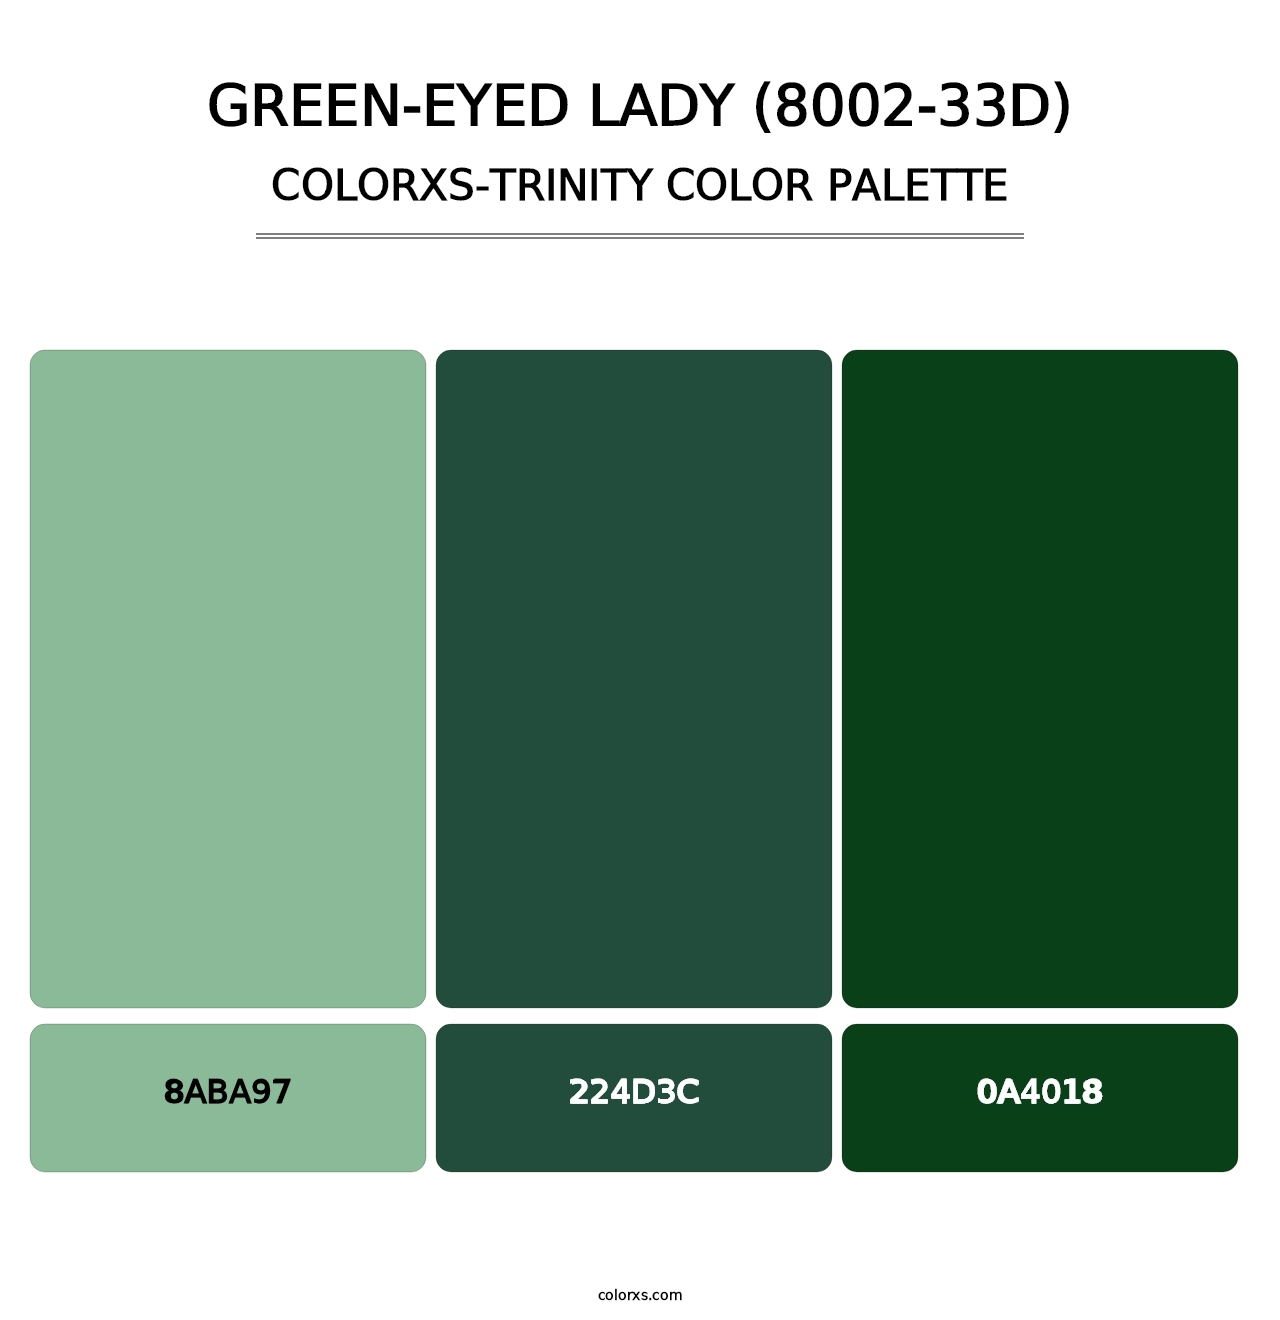 Green-Eyed Lady (8002-33D) - Colorxs Trinity Palette